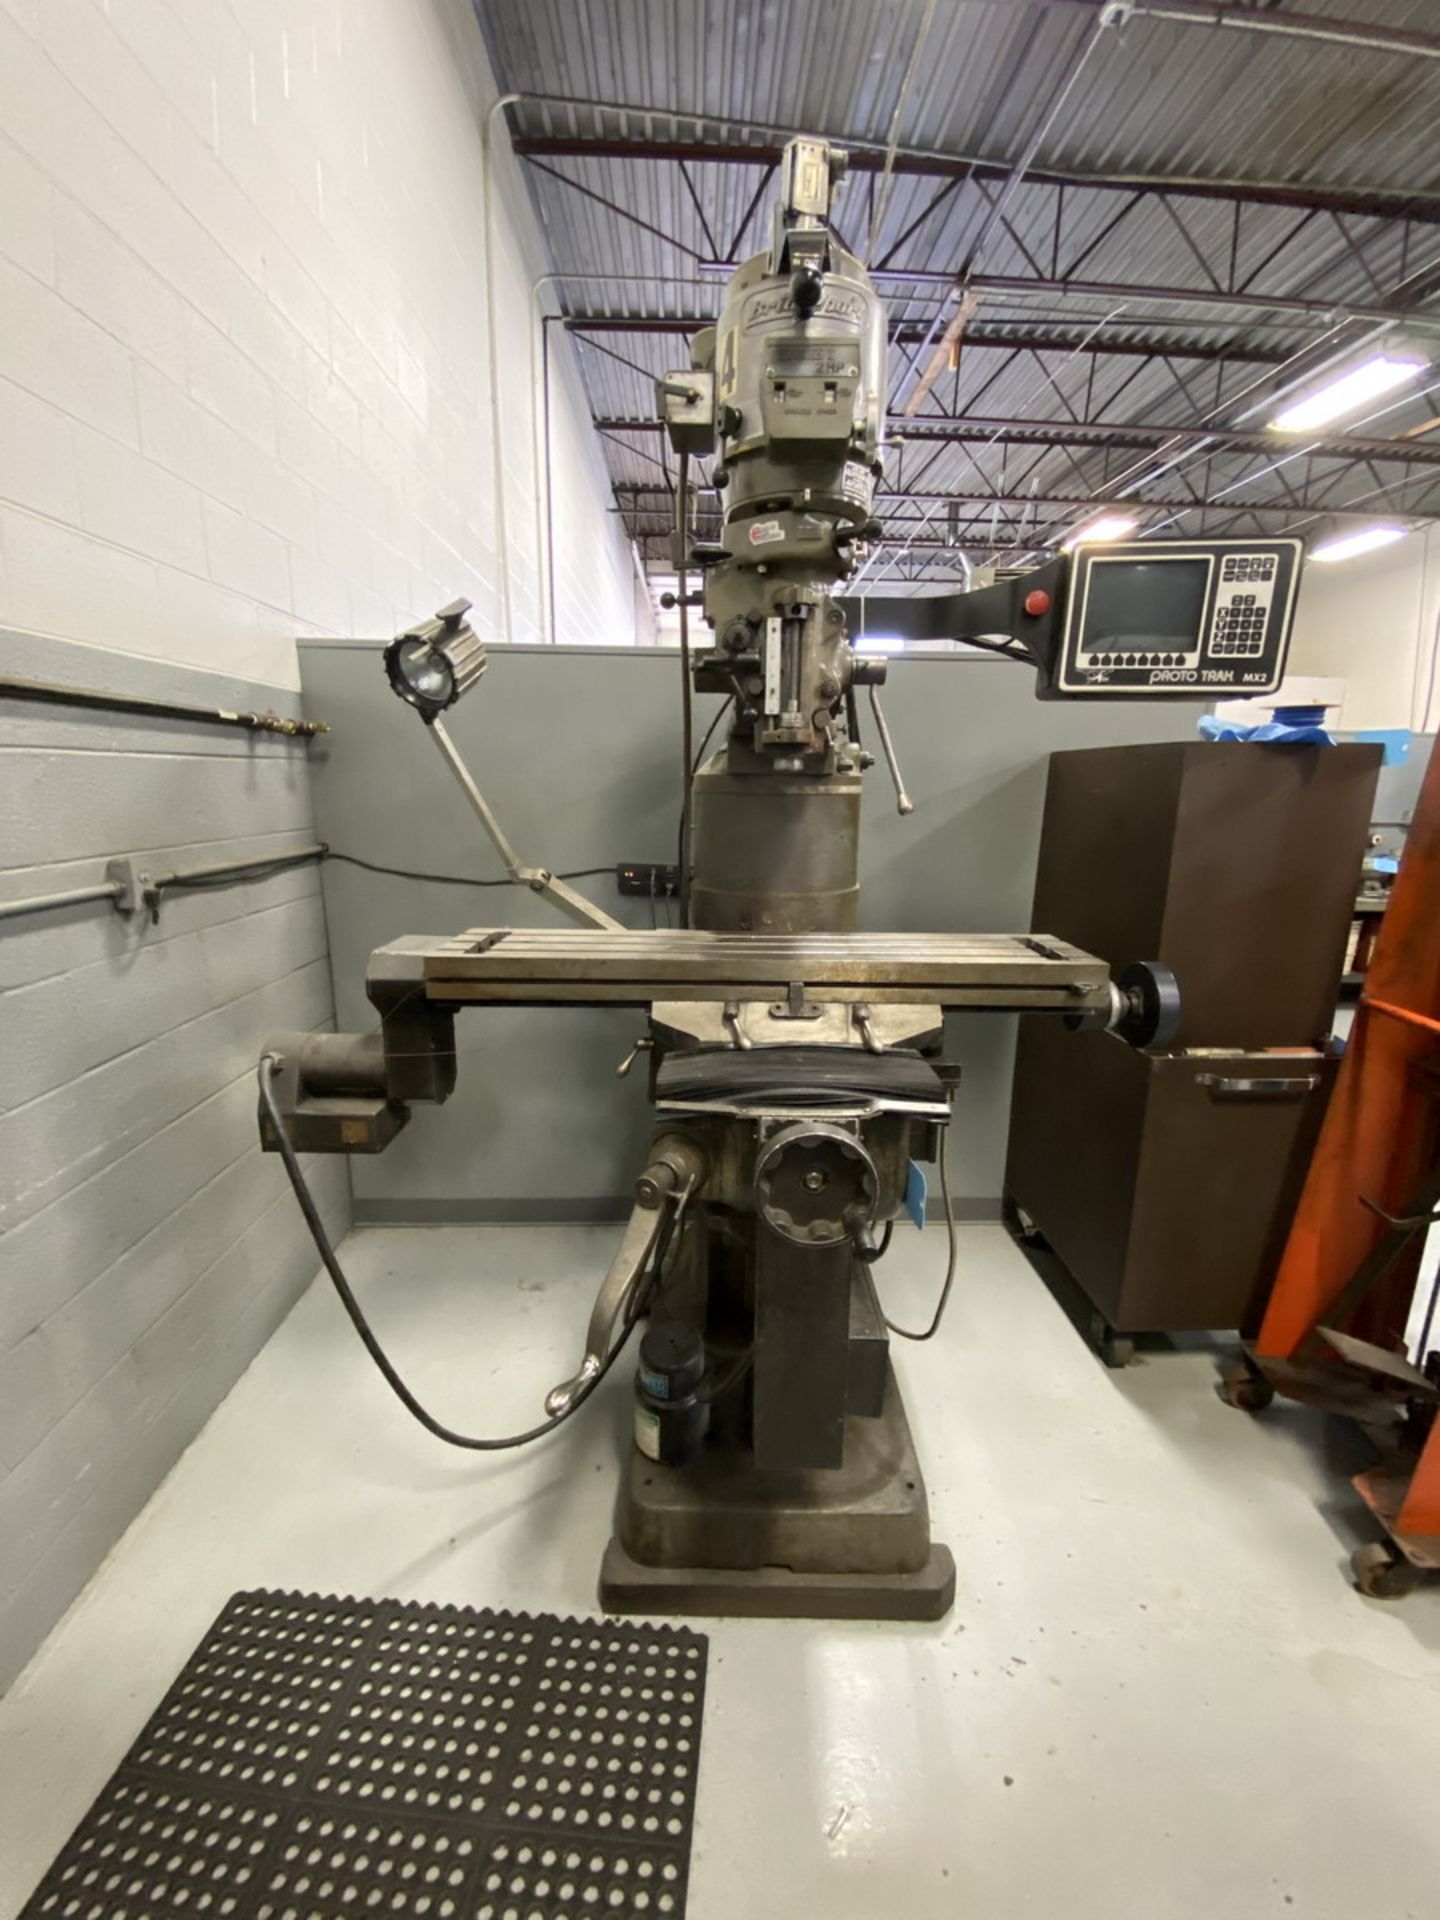 Bridgeport 2-Axis CNC Vertical Mill, Proto Trak MX 2 Control, 9'' x 42'' Table (Control Issue) - Image 3 of 13